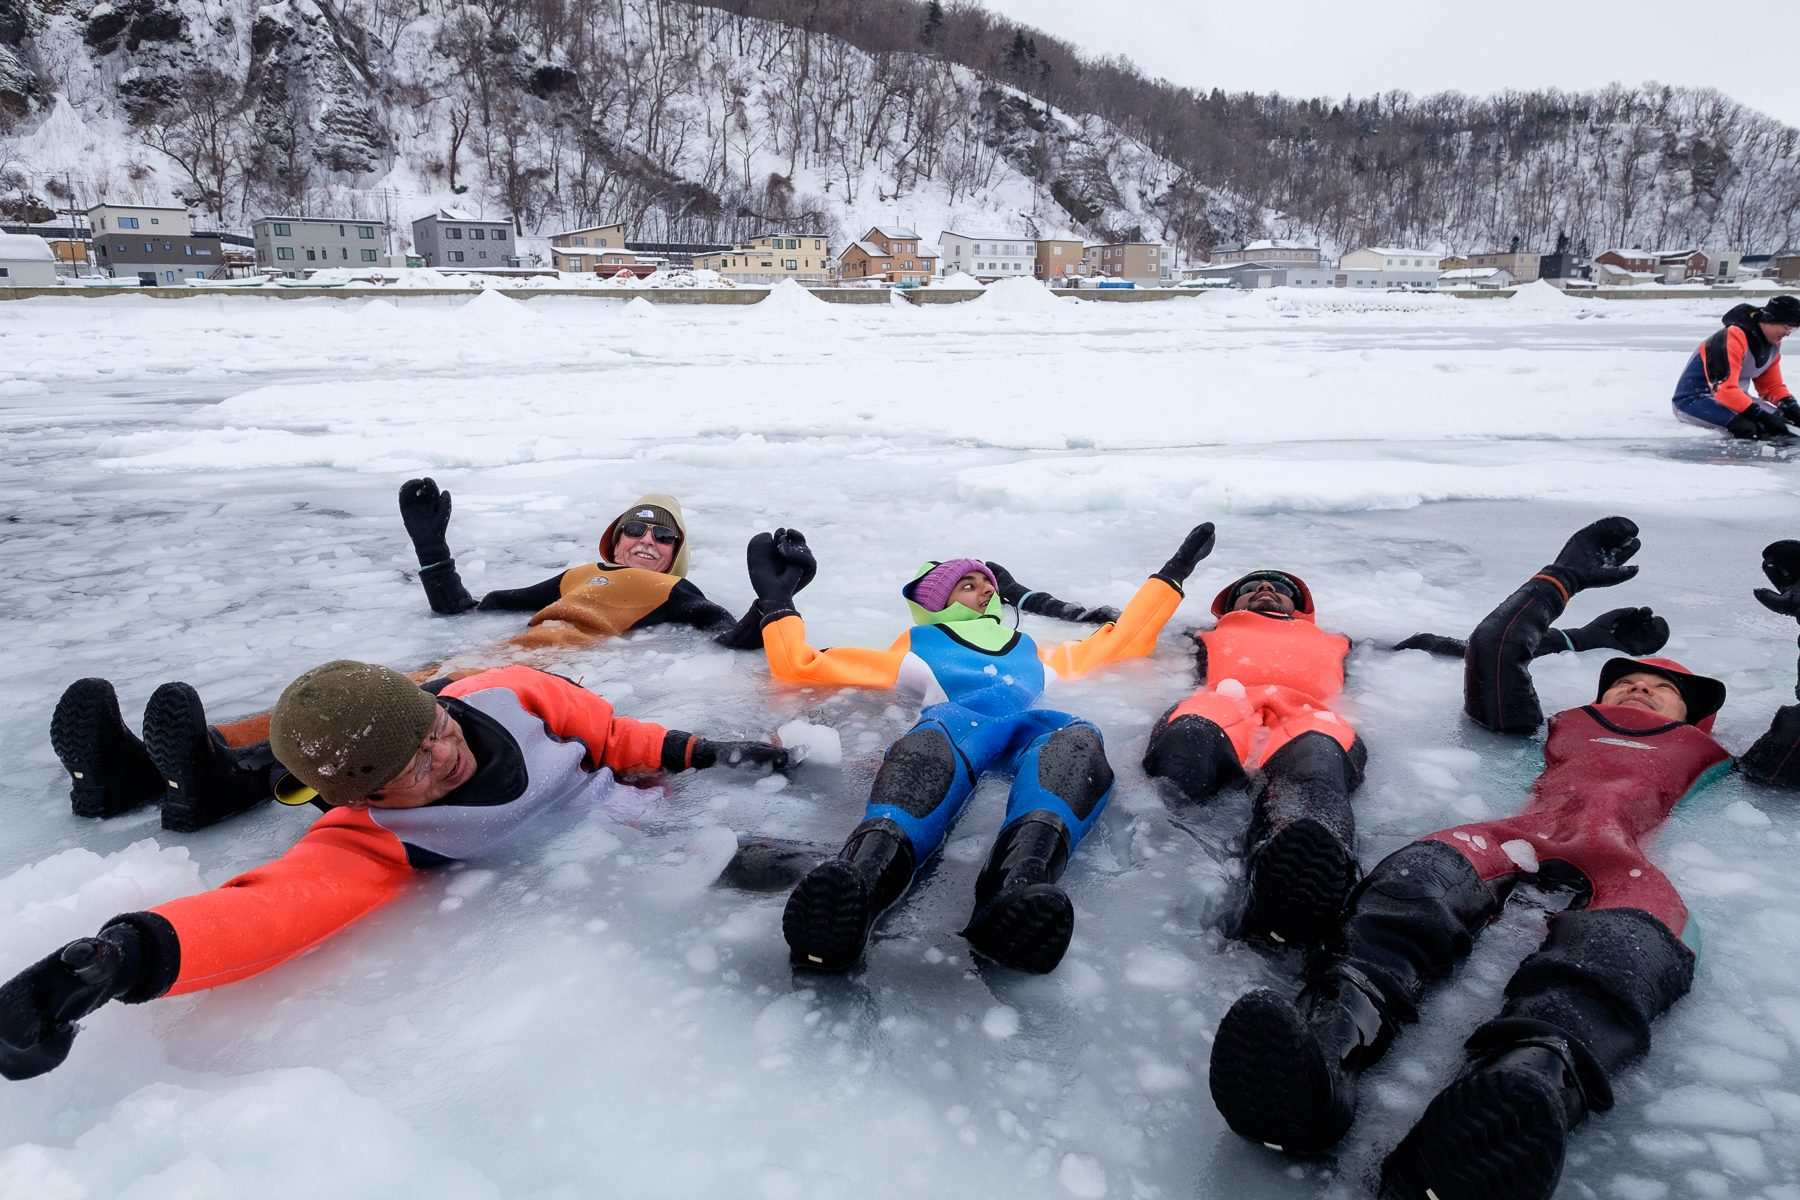 A group of tourists take a dip in icy water in the Sea of Okhotsk of the coast of Utoro in Shiretoko